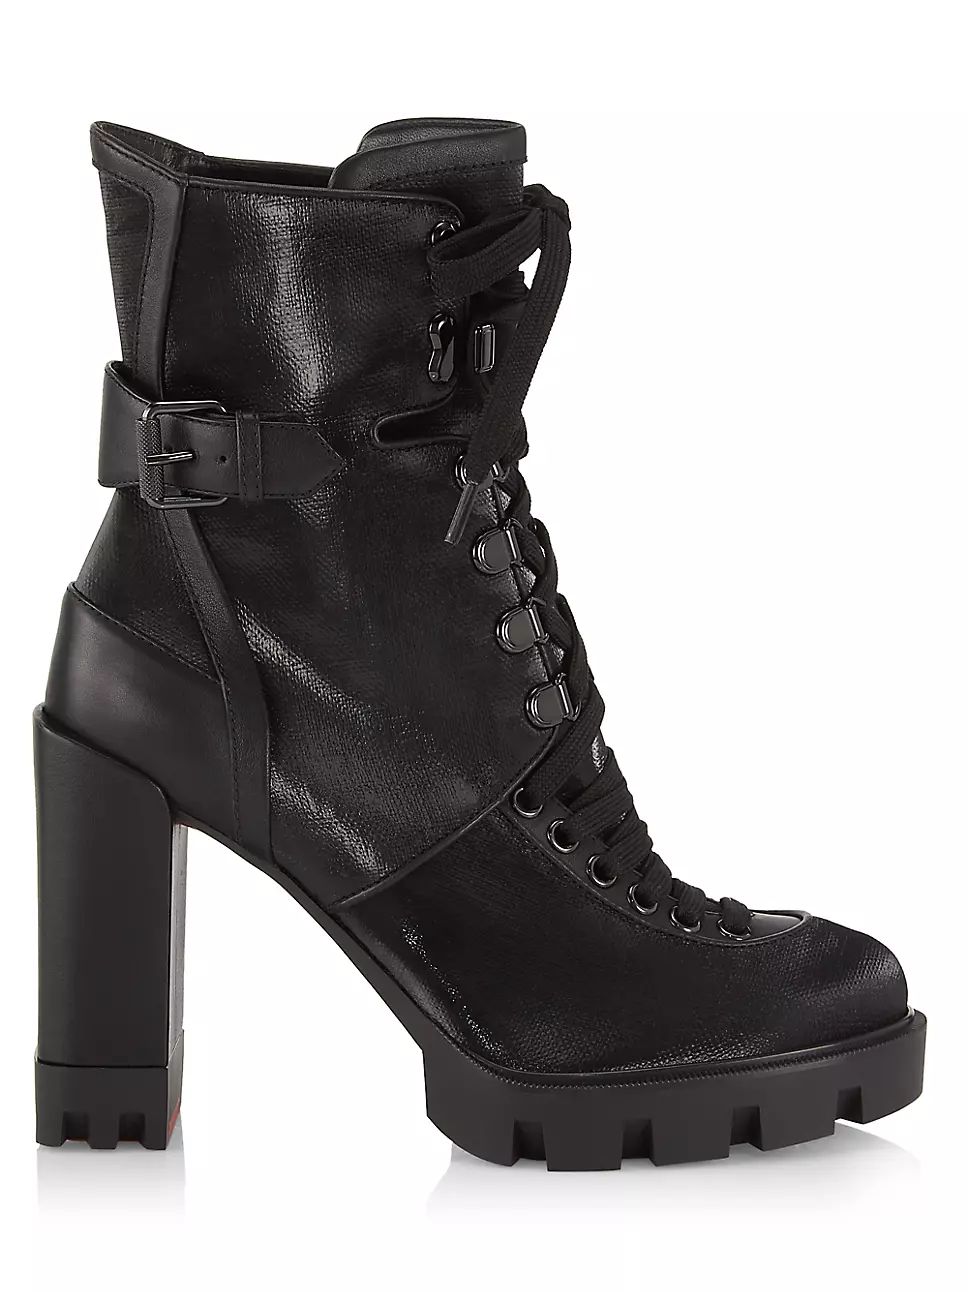 Macademia 100MM Lace-Up Booties | Saks Fifth Avenue